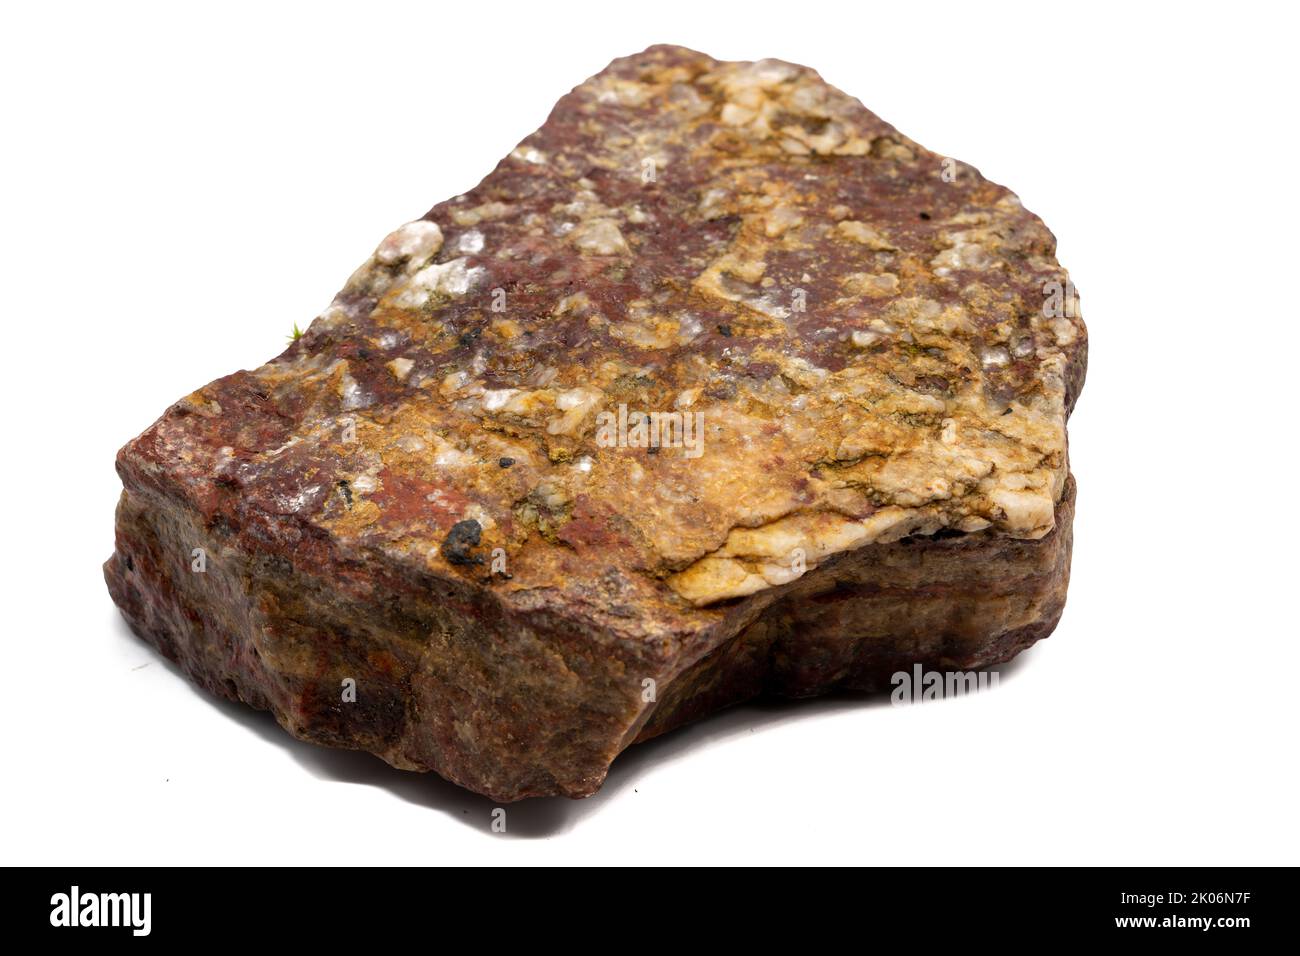 Red granite rock isolated on white background Stock Photo